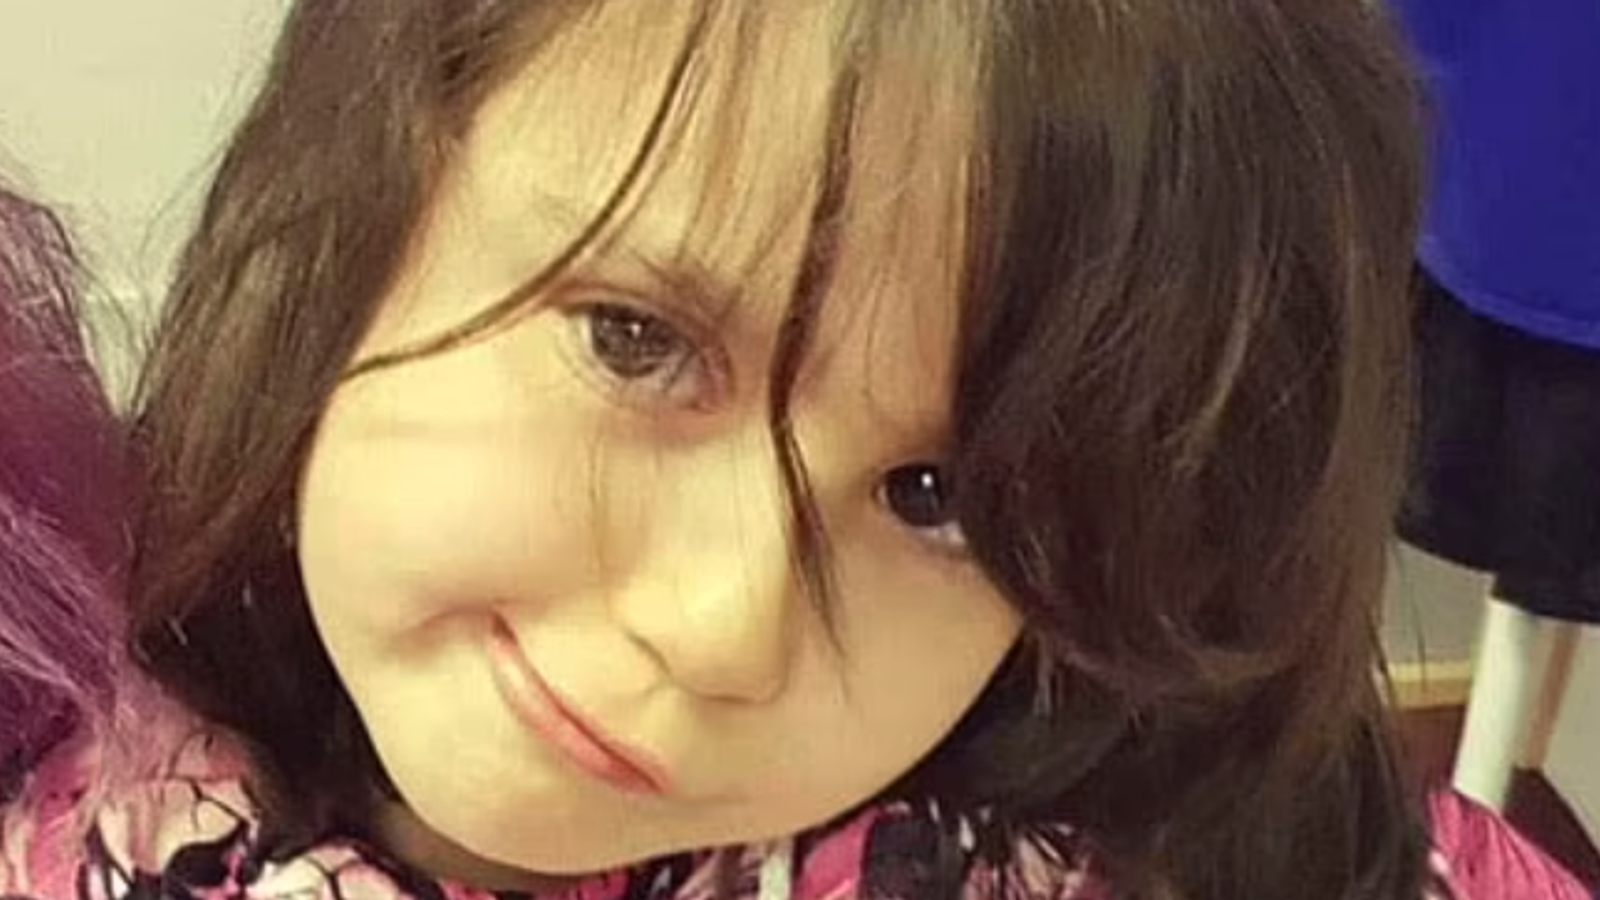 Sara Sharif: Five children who travelled to Pakistan with their father taken into custody